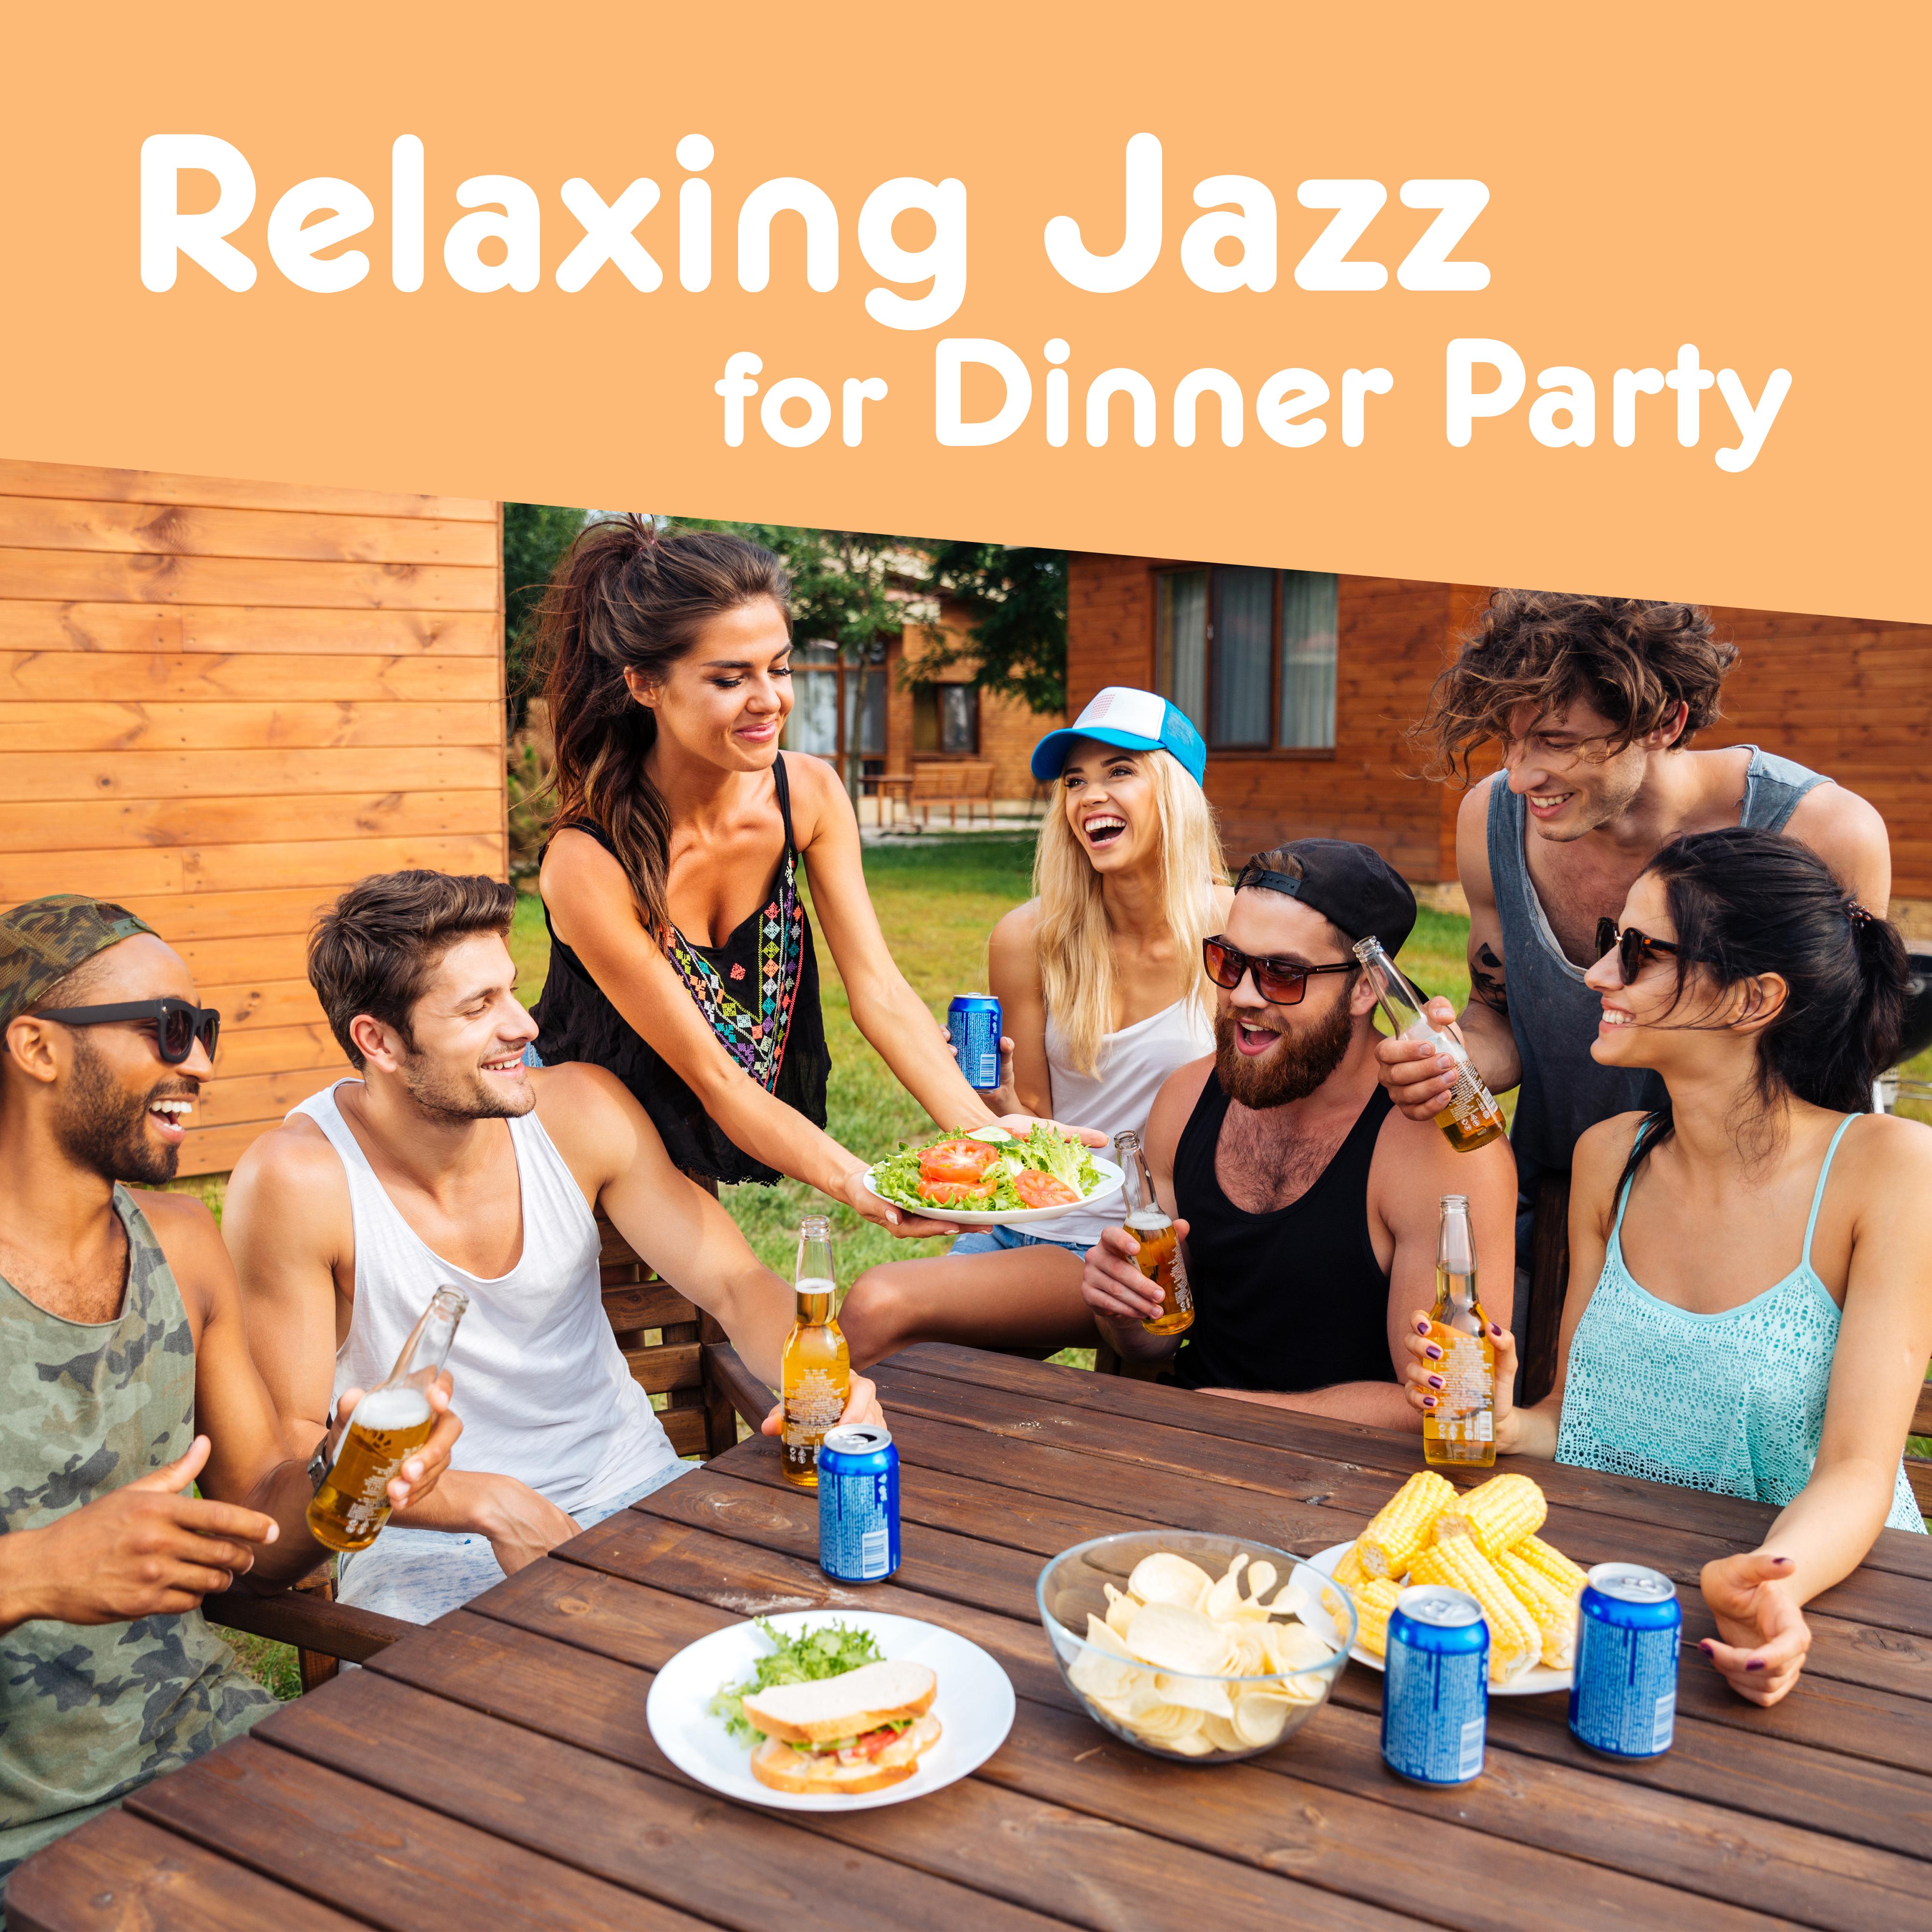 Relaxing Jazz for Dinner Party  Piano Bar, Jazz Cafe, Music for Restaurant, Dinner with Friends, Pure Rest  Chill